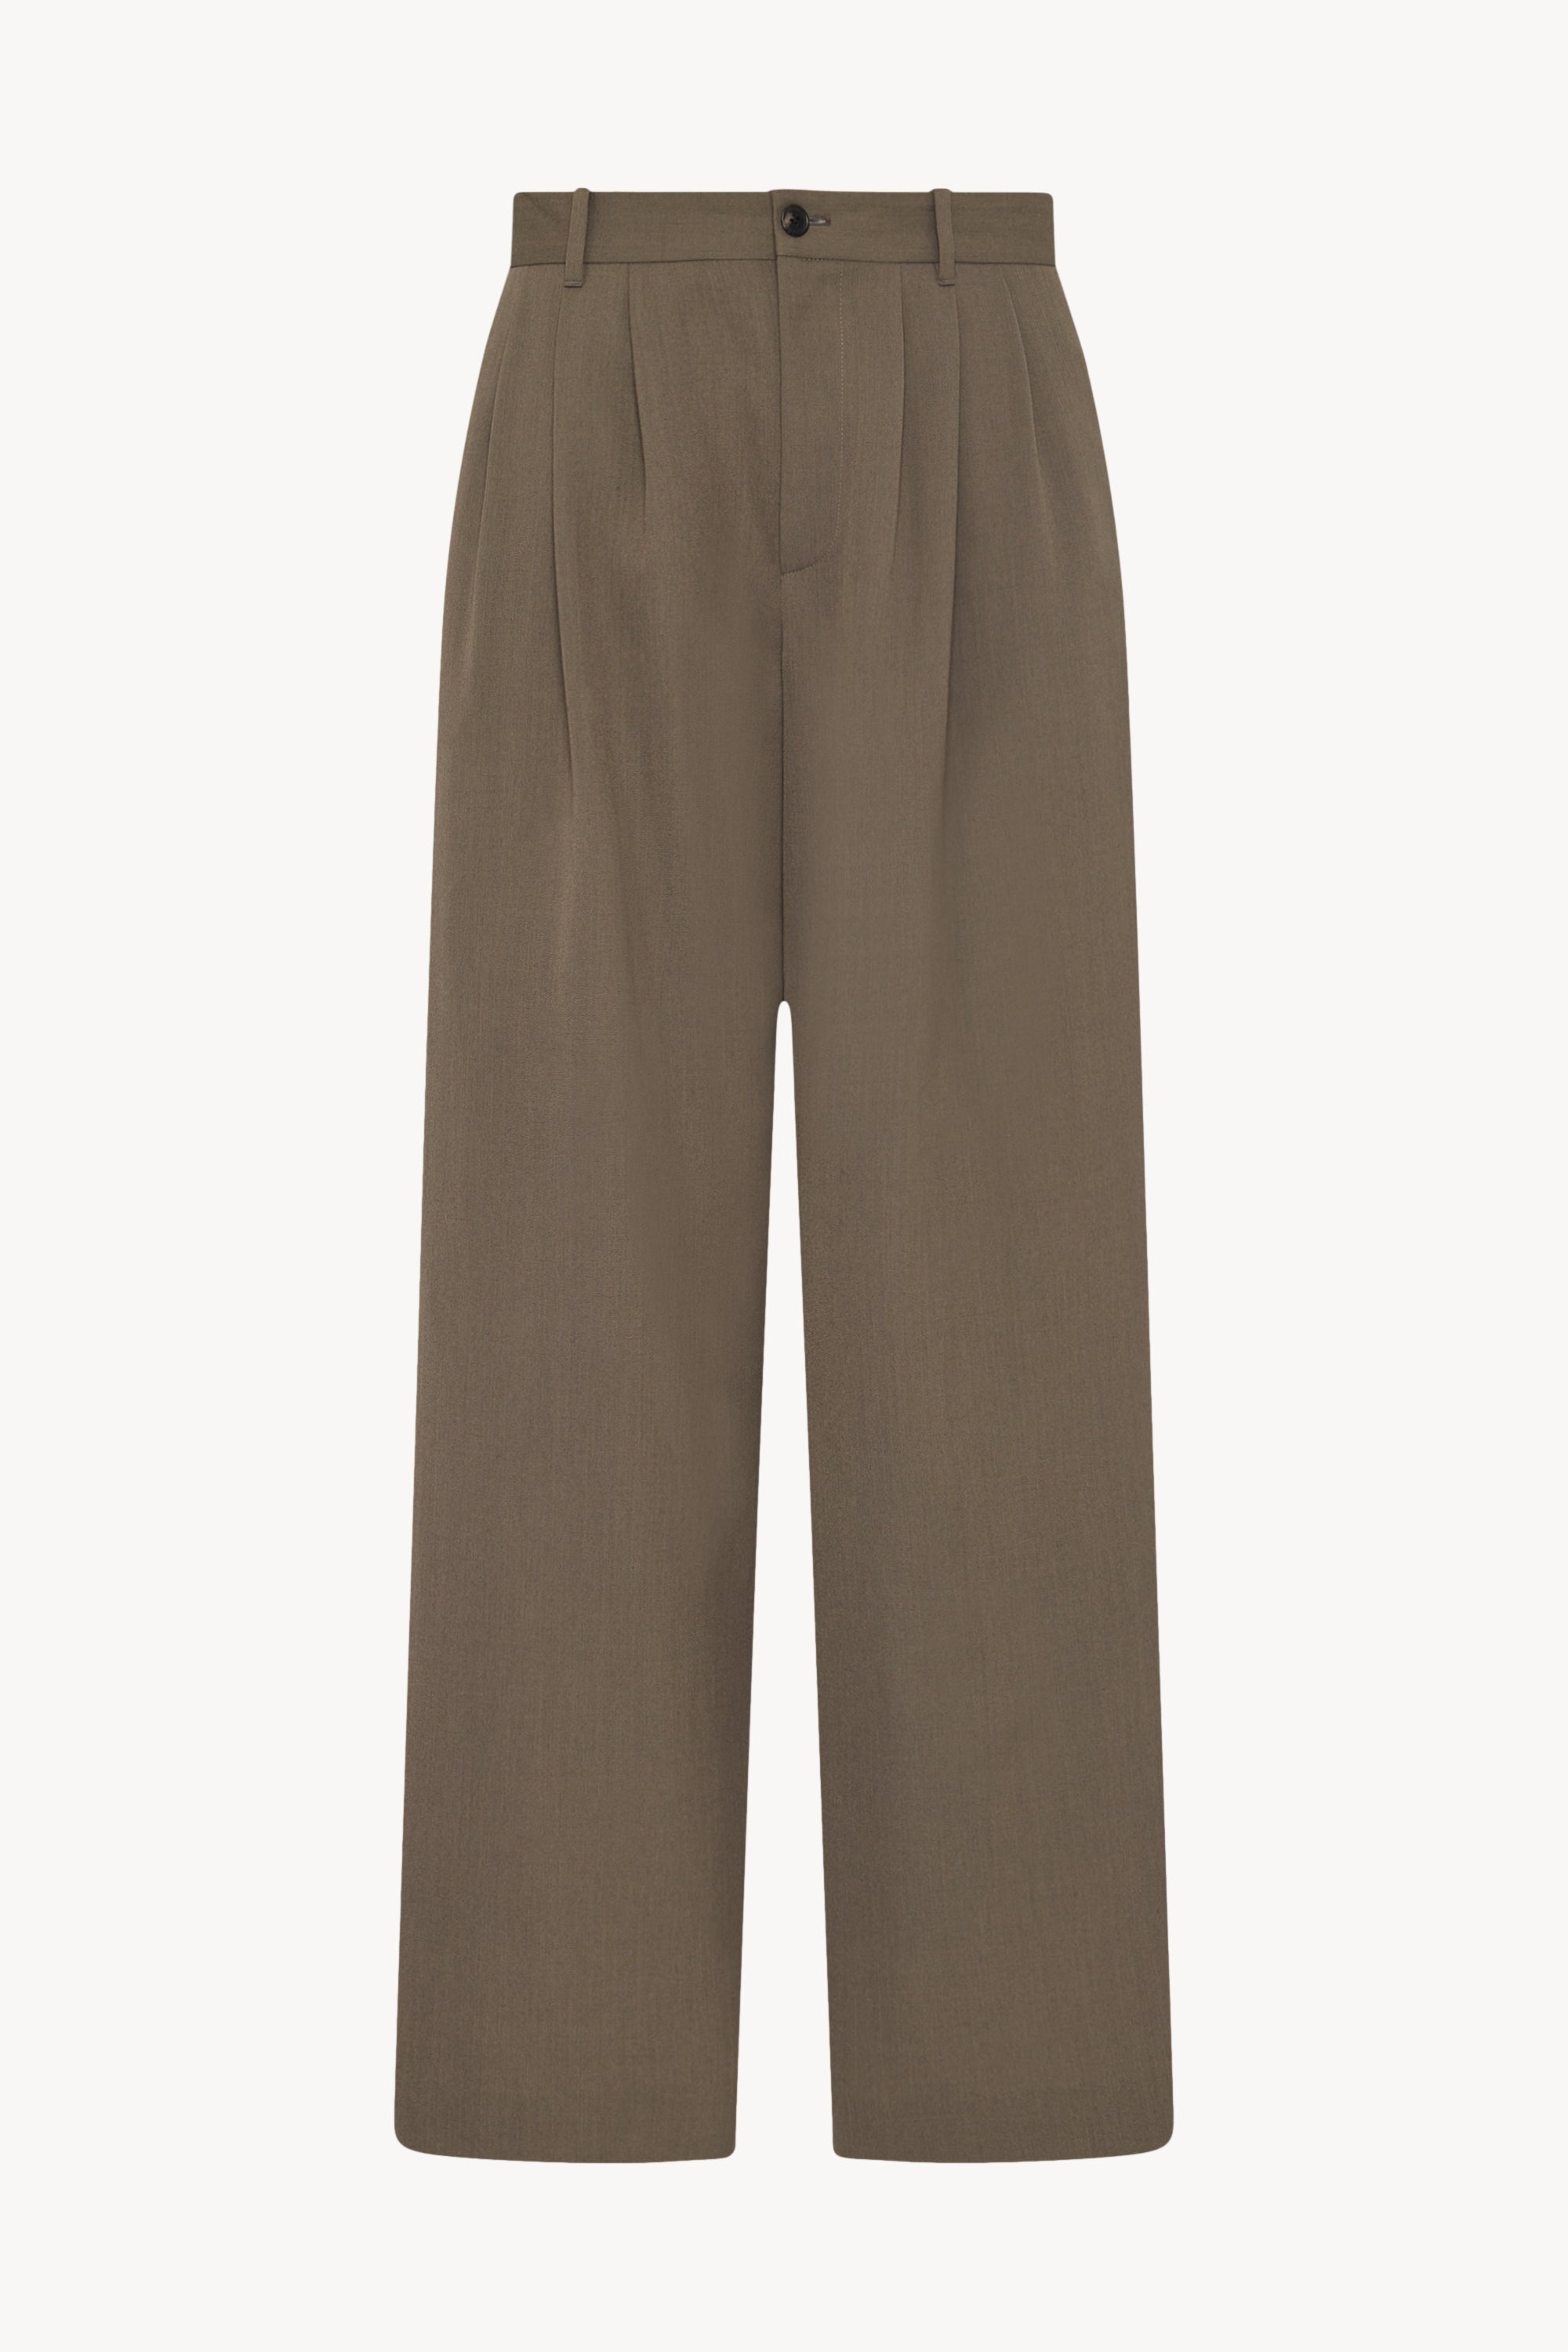 Rufus Pant in Polyester and Virgin Wool - 1